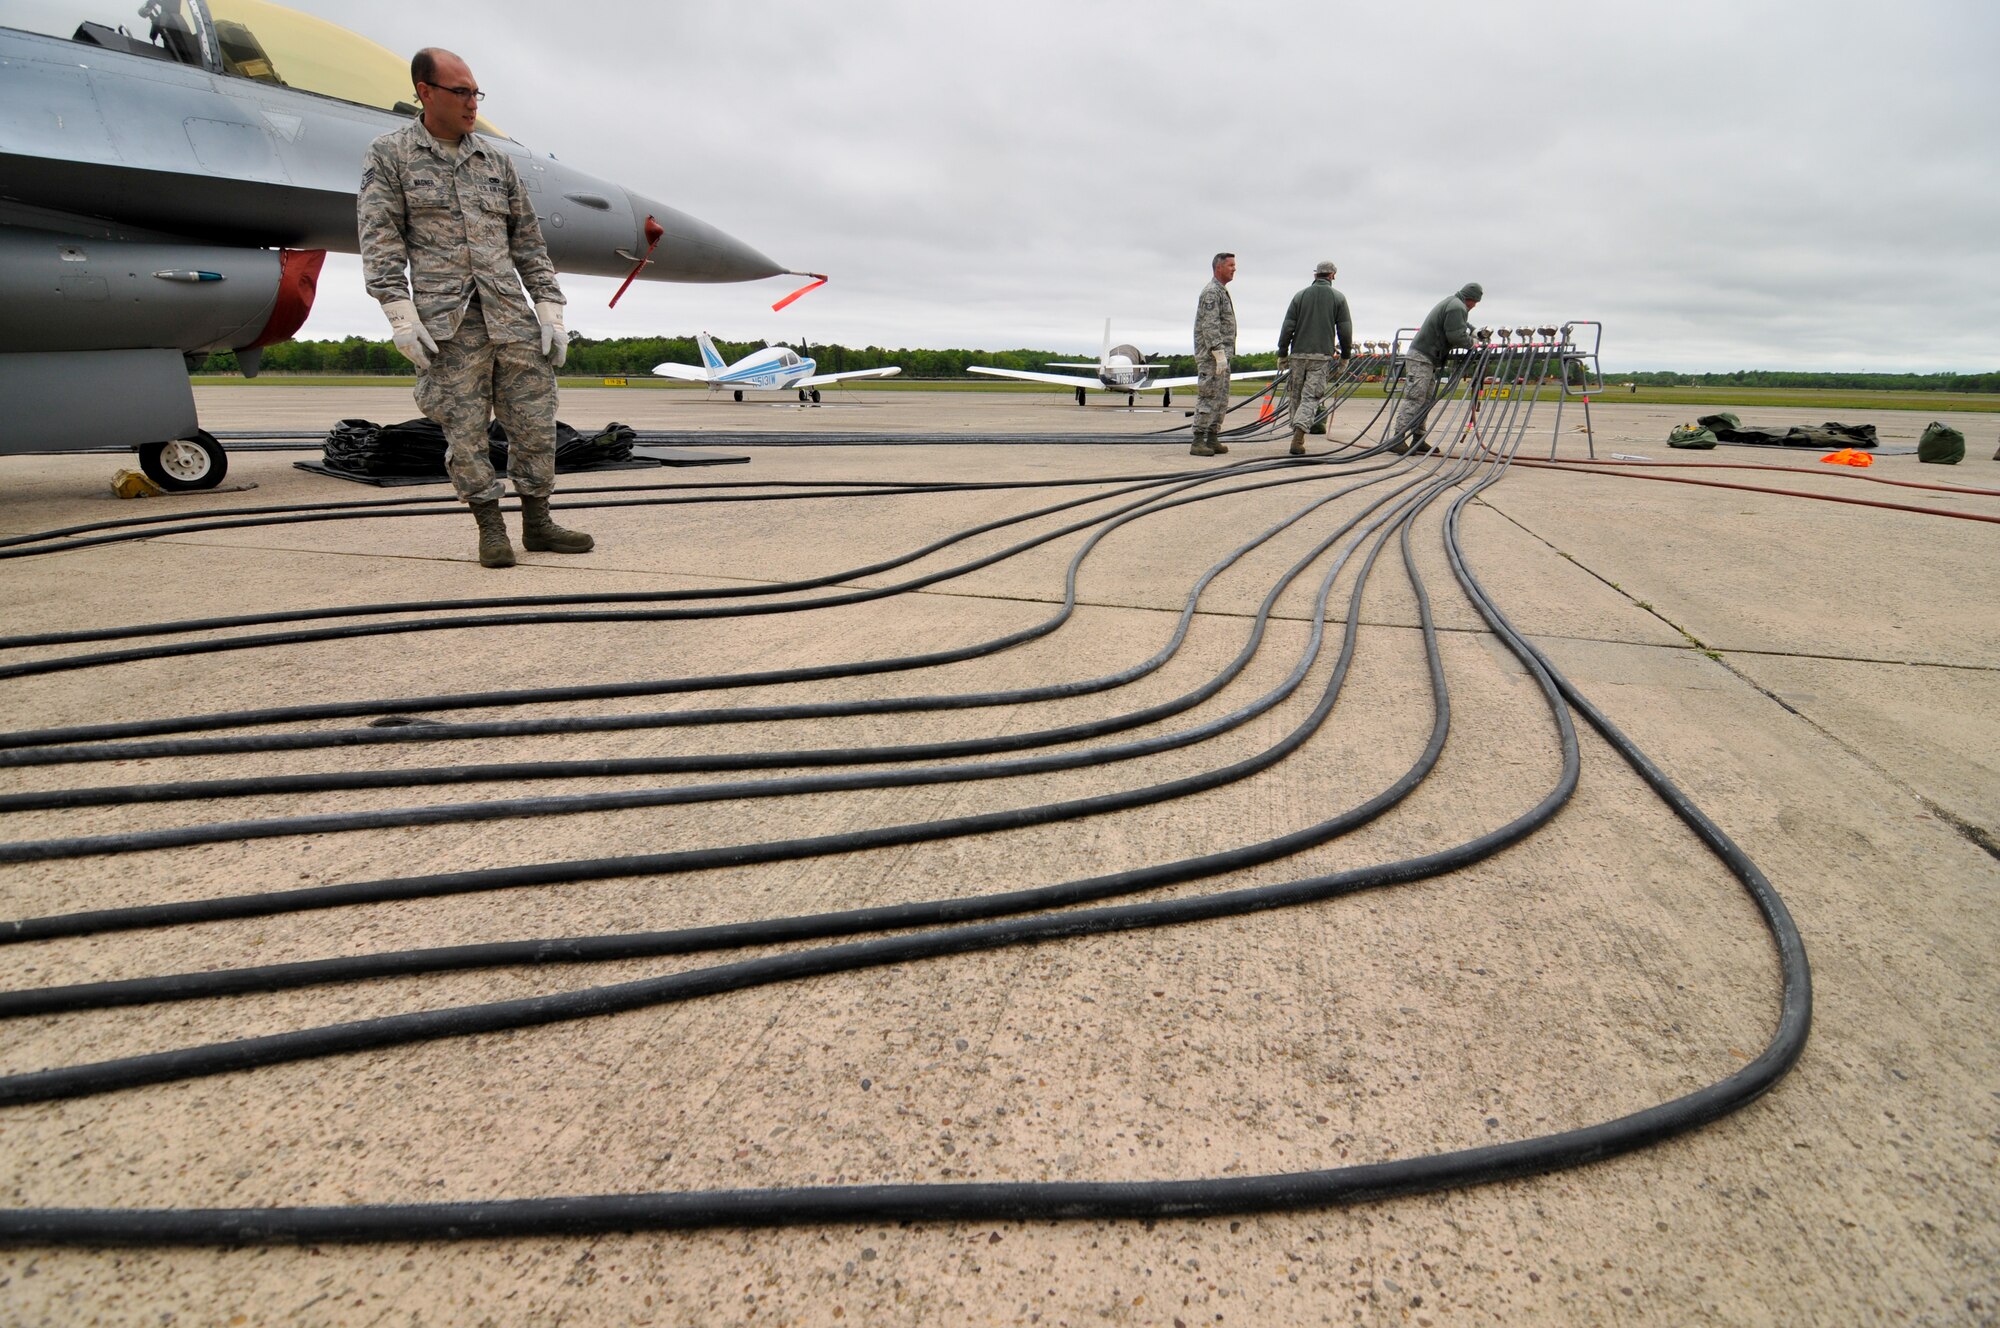 A picture of U.S. Air Force Staff Sgt. Matt Wagner, aircraft maintainer with the New Jersey Air National Guard's 177th Fighter Wing, surveying pneumatic hoses connected to a lifting bag assembly under a decommissioned F-16D Fighting Falcon.